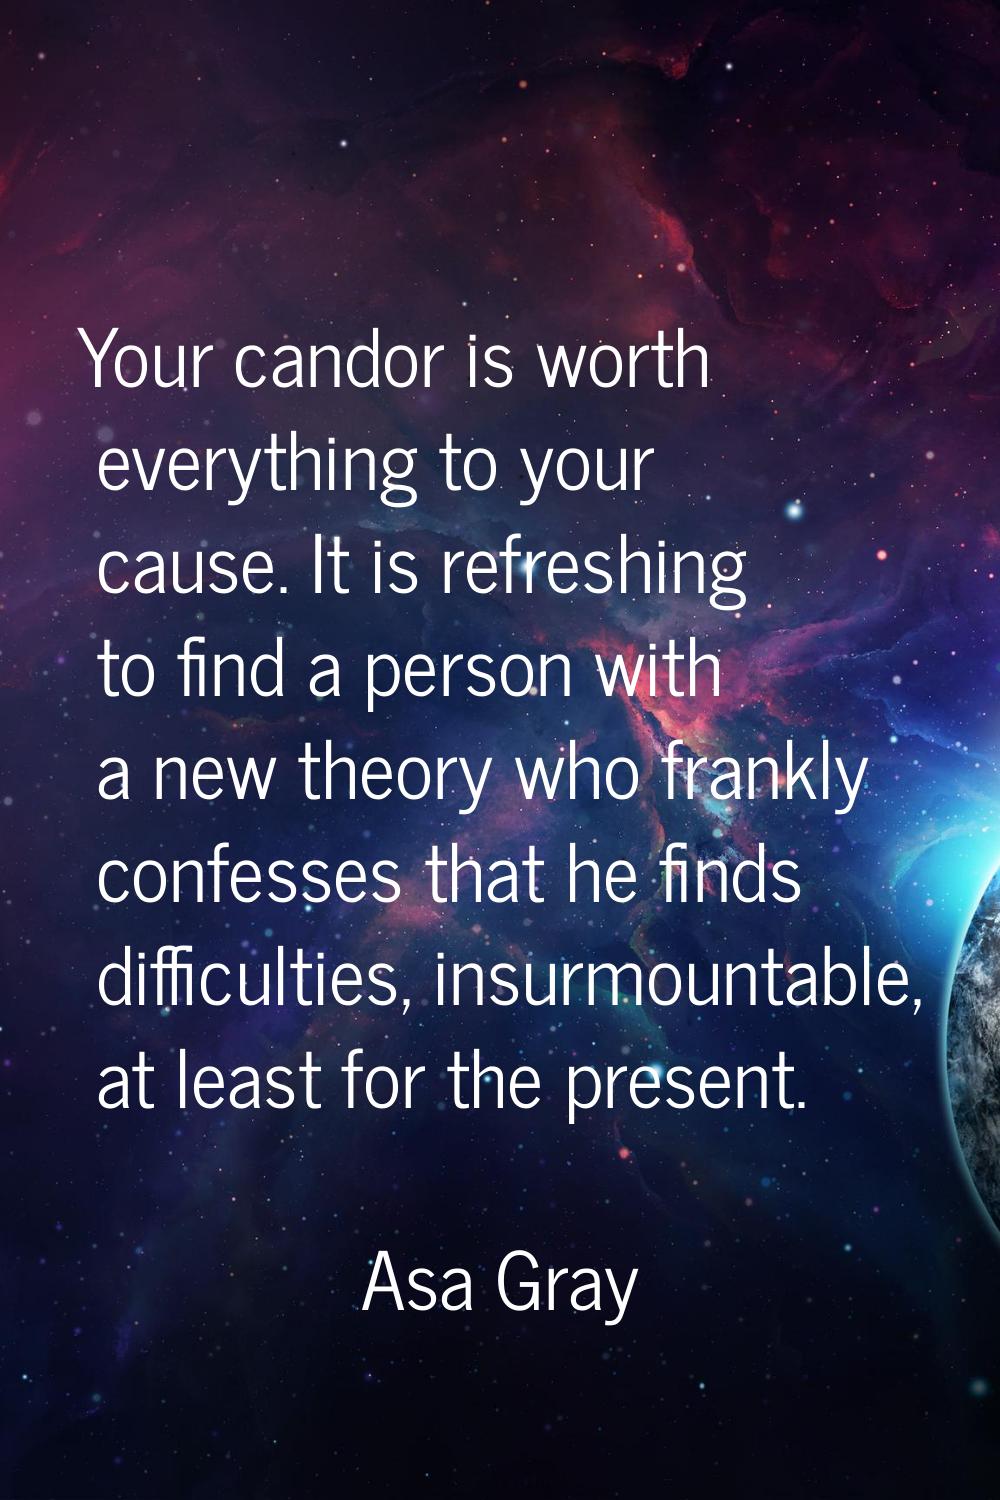 Your candor is worth everything to your cause. It is refreshing to find a person with a new theory 